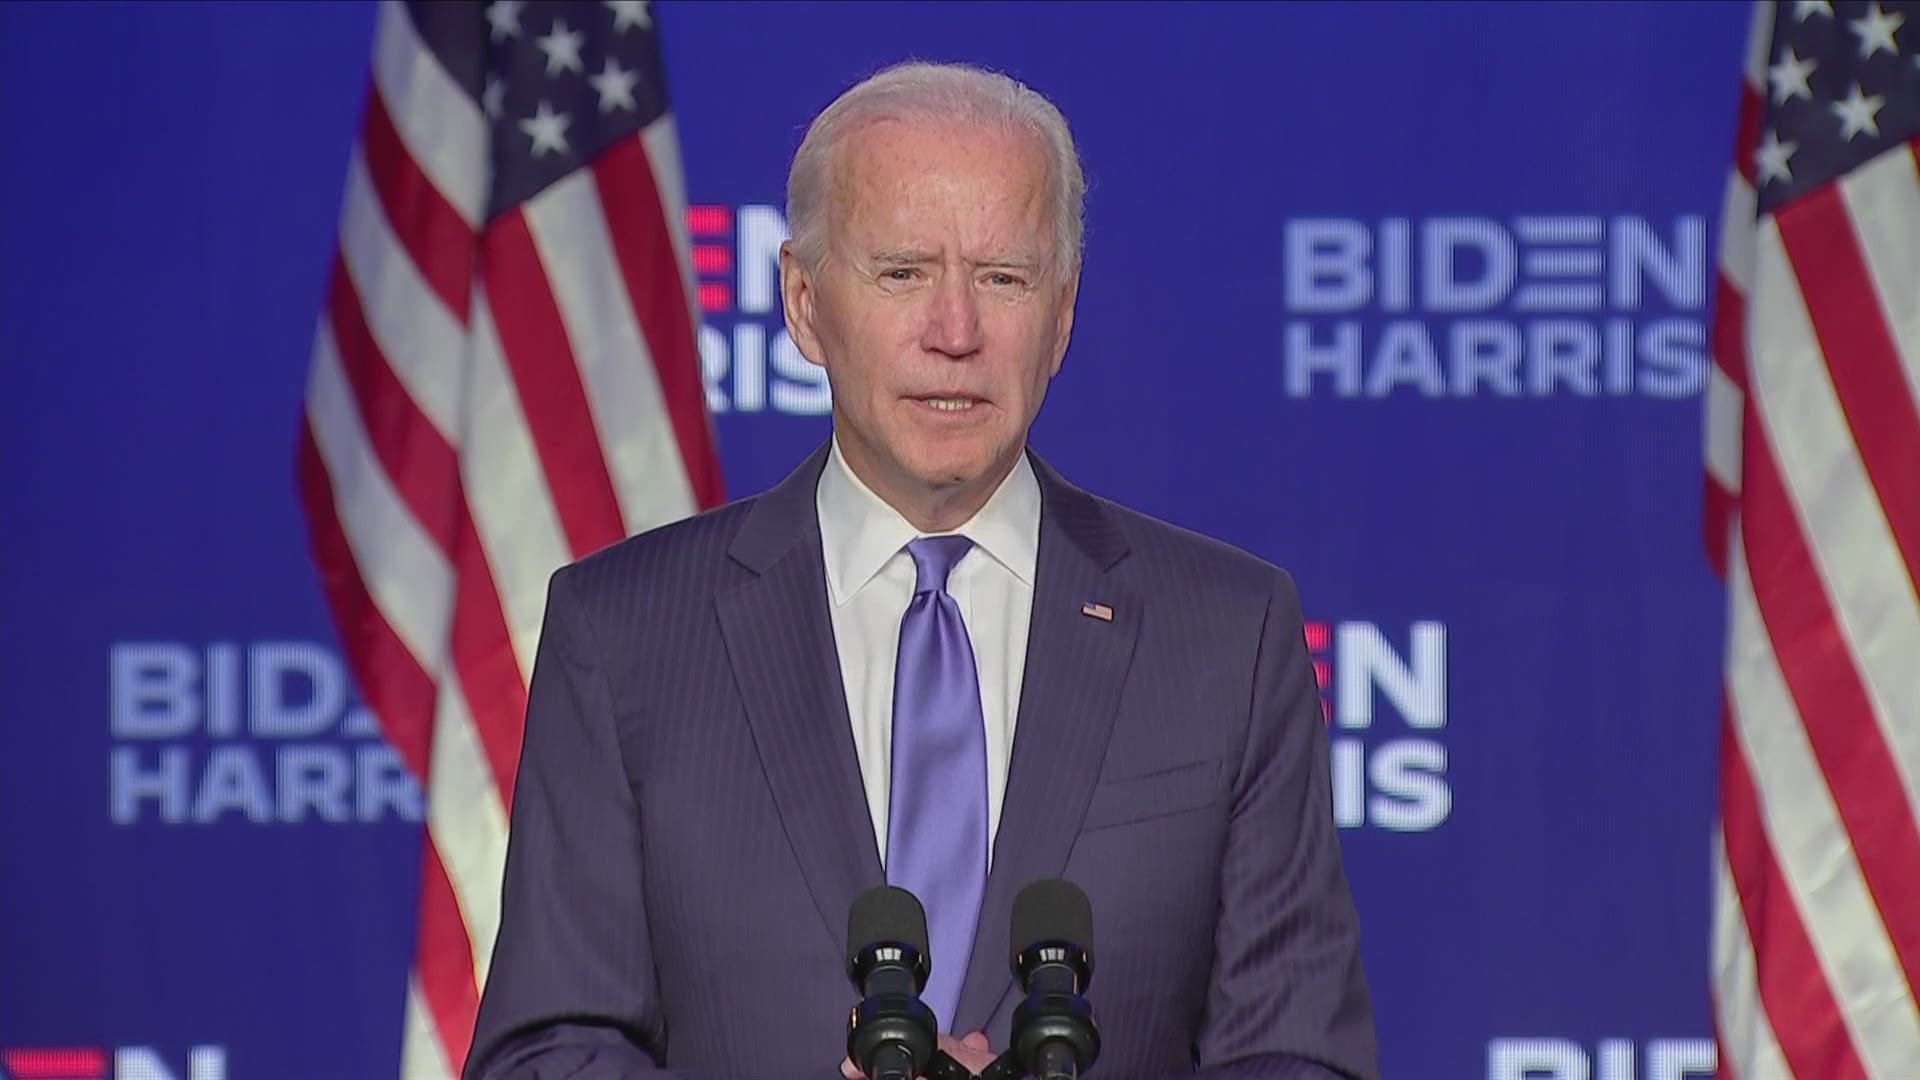 Former Vice President Joe Biden said he expects to win the presidency, citing growing vote margins in Pennsylvania, Georgia and Nevada, and a lead in Arizona.